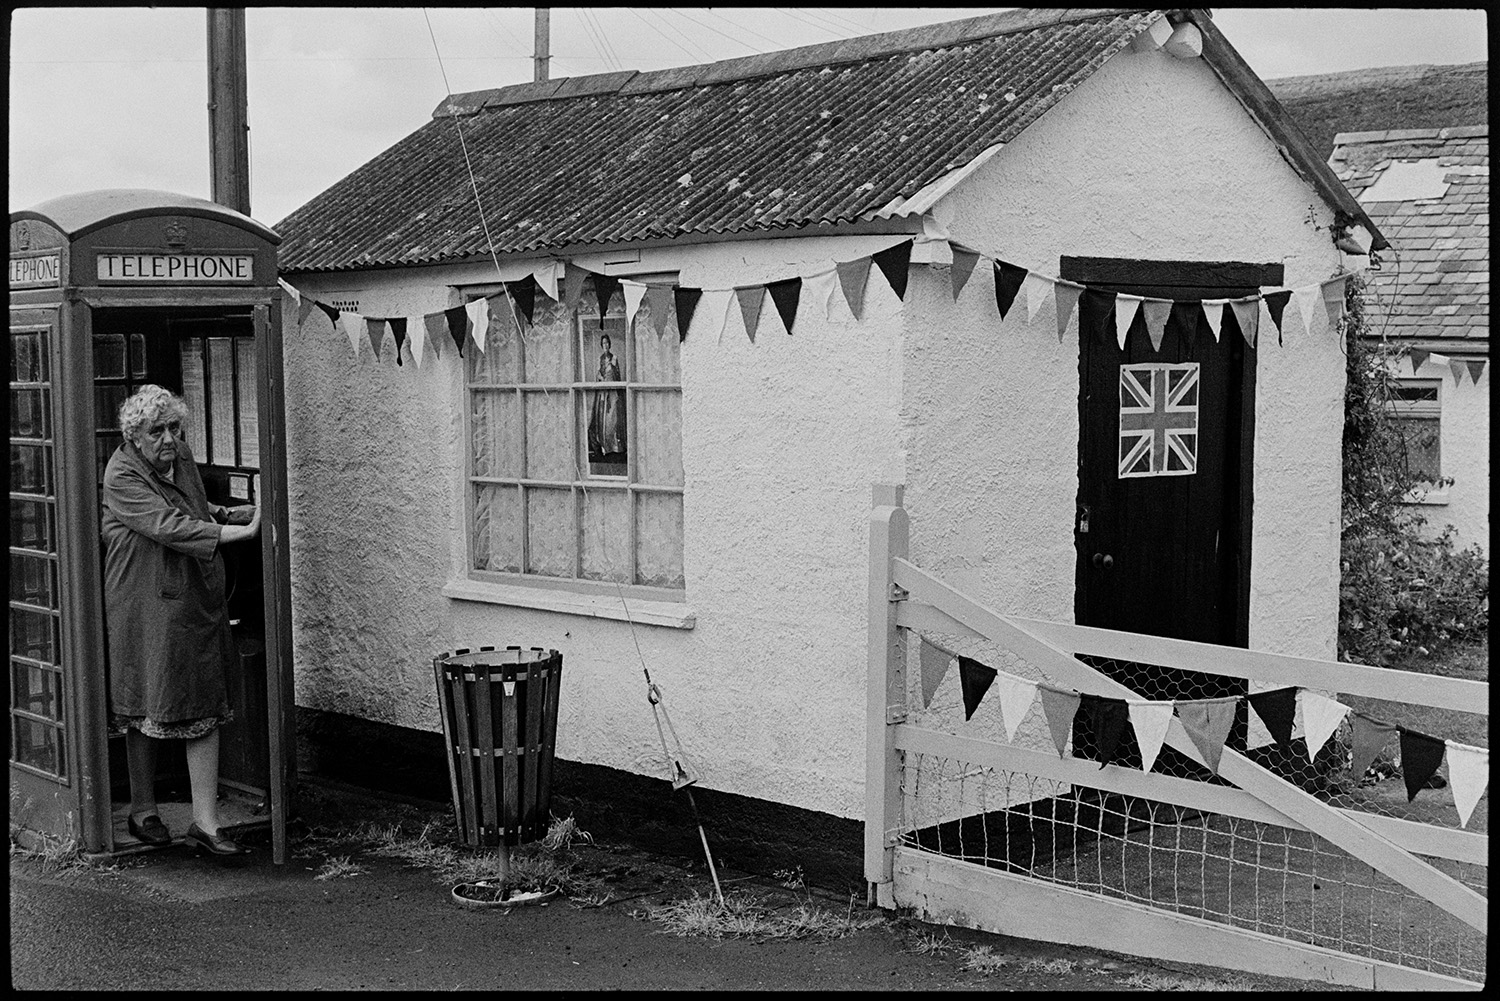 Decorated shed and telephone kiosk at Jubilee time.
[A woman coming out of a telephone box in Kings Nympton, next to a small building with a corrugated iron roof. The building is decorated with a union jack flag on the door, a photograph of the Queen in the window, and bunting for  the Silver Jubilee of Queen Elizabeth II.]